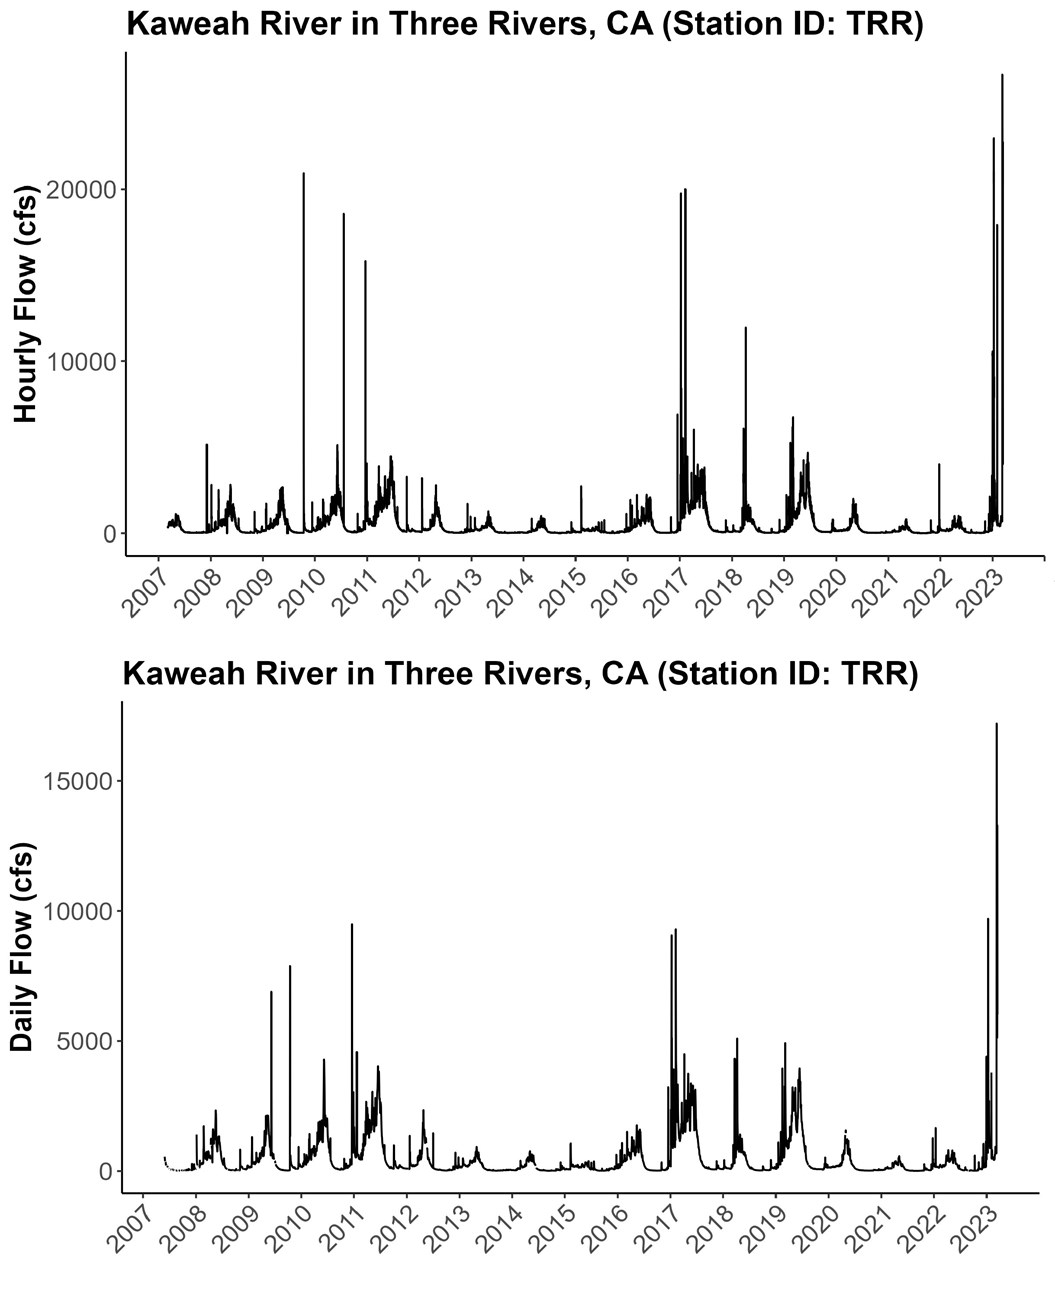 Upper graph shows peak hourly flows (0 to >20,000 cfs) and the lower graph shows mean daily flows (0-10,000 cfs) from May  2007-Mar 2023 (0-10,000 cfs). There is a lot of variability especially in hourly flows.